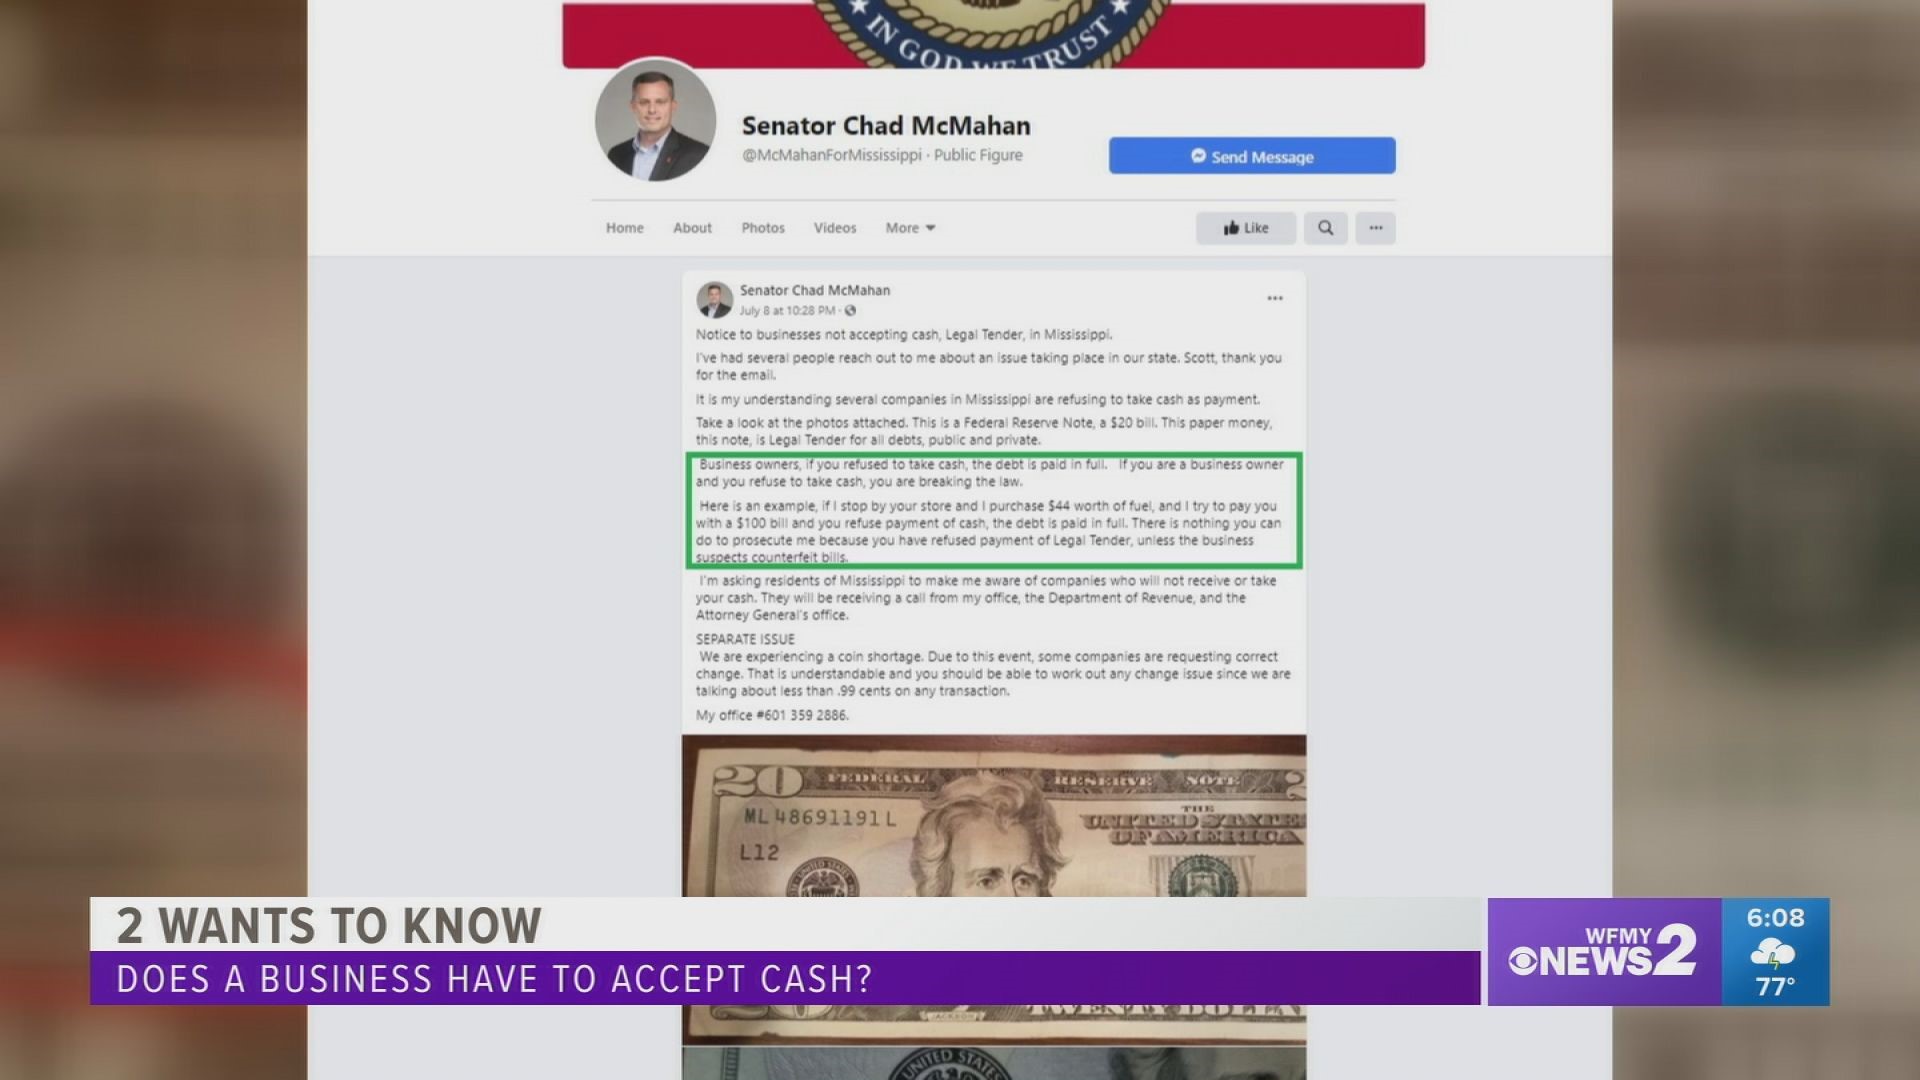 Senator Chad McMahan posted the claim on Facebook. AG Josh Stein says stores can turn away cash, but they should have signs saying so.